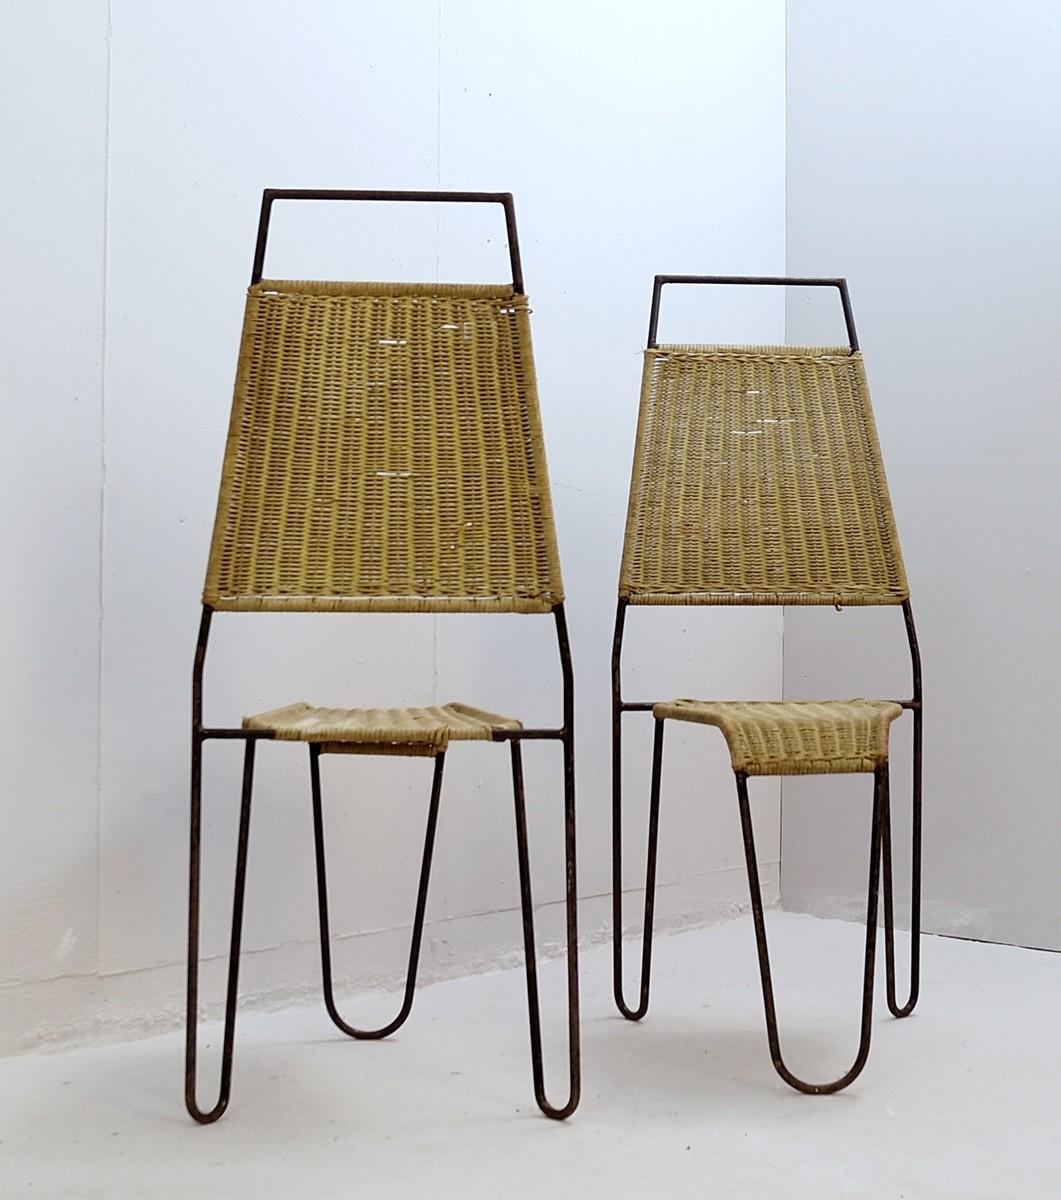 Mid-Century Modern Pair of Chairs in Wicker and Steel Attr. to Raoul Guys for Airborne, ca 1950